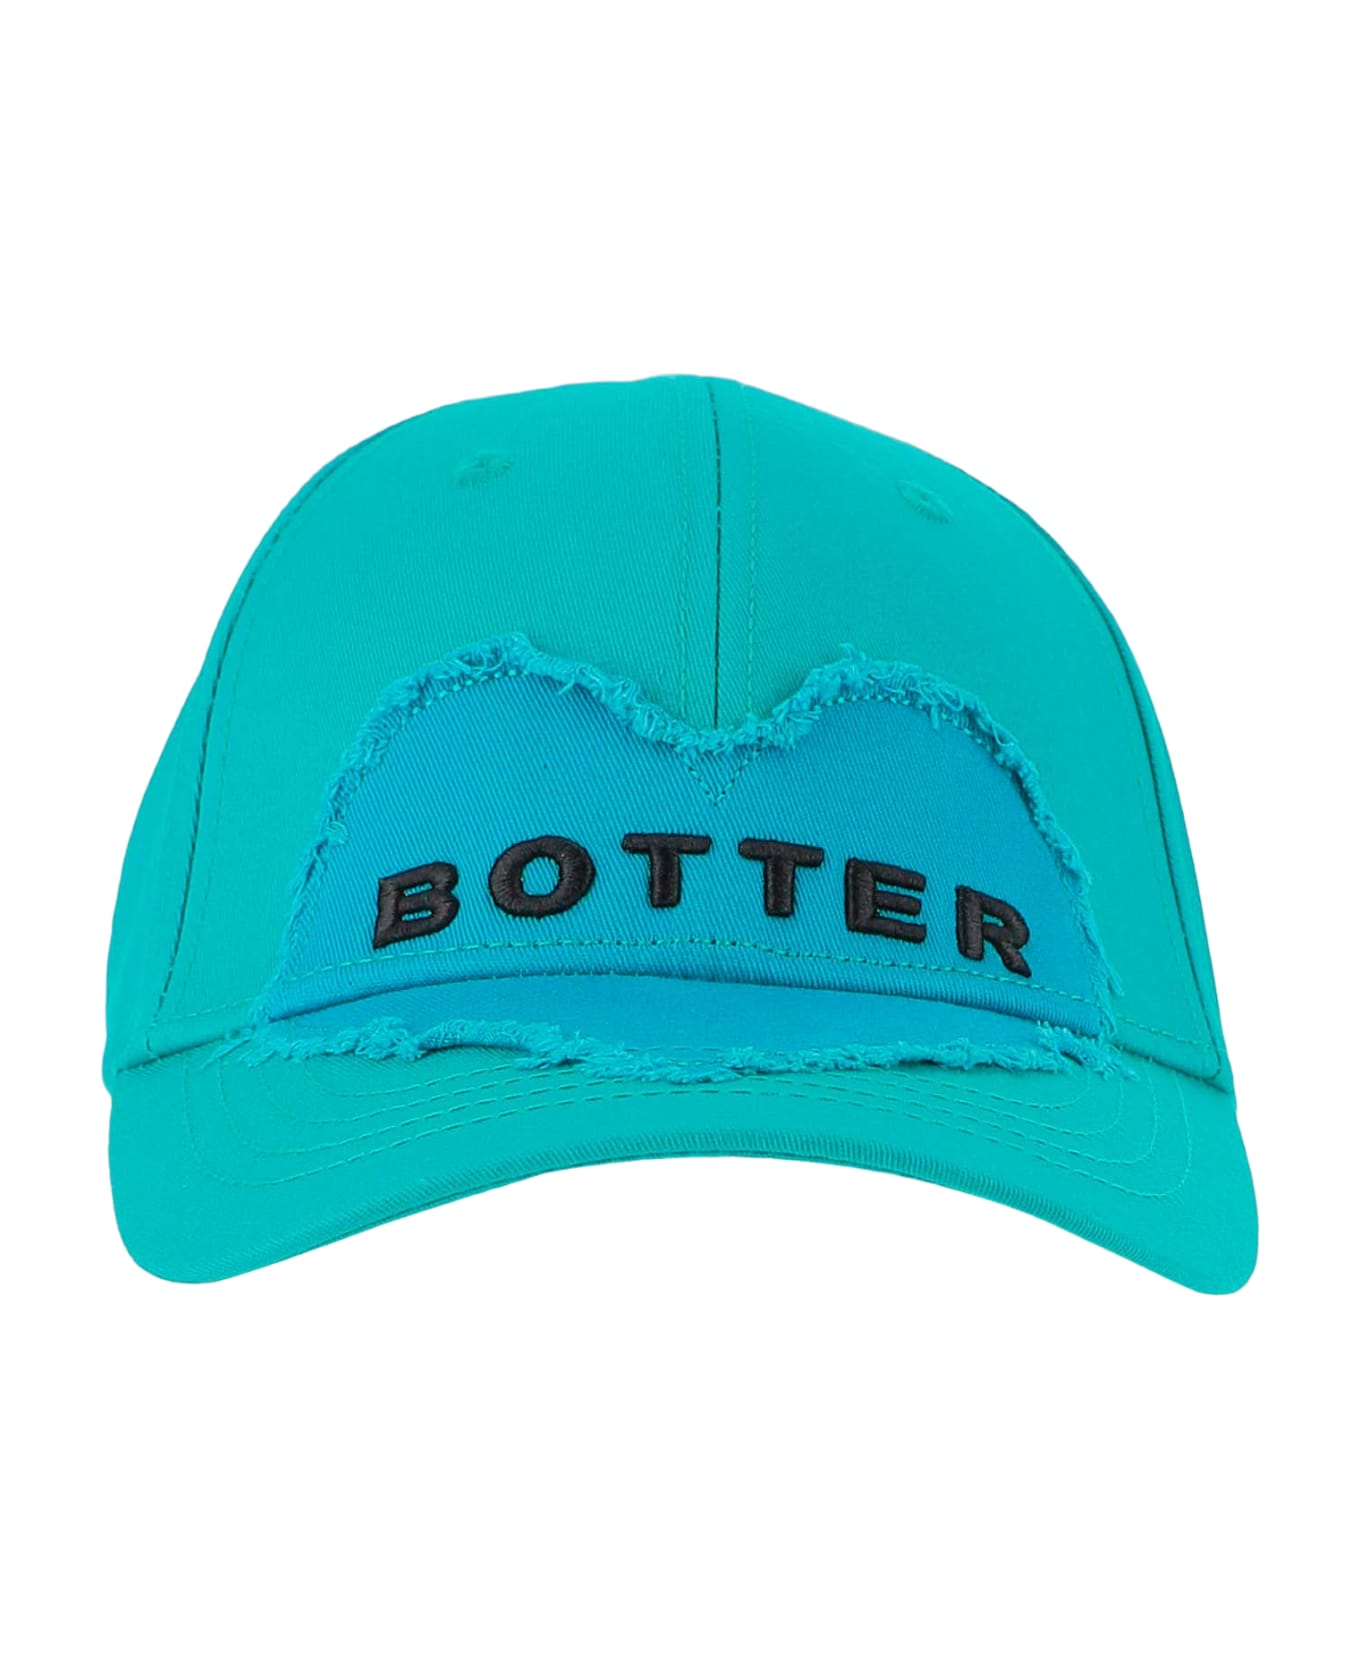 Botter Baseball Cap With Embroidered Logo - Red 帽子